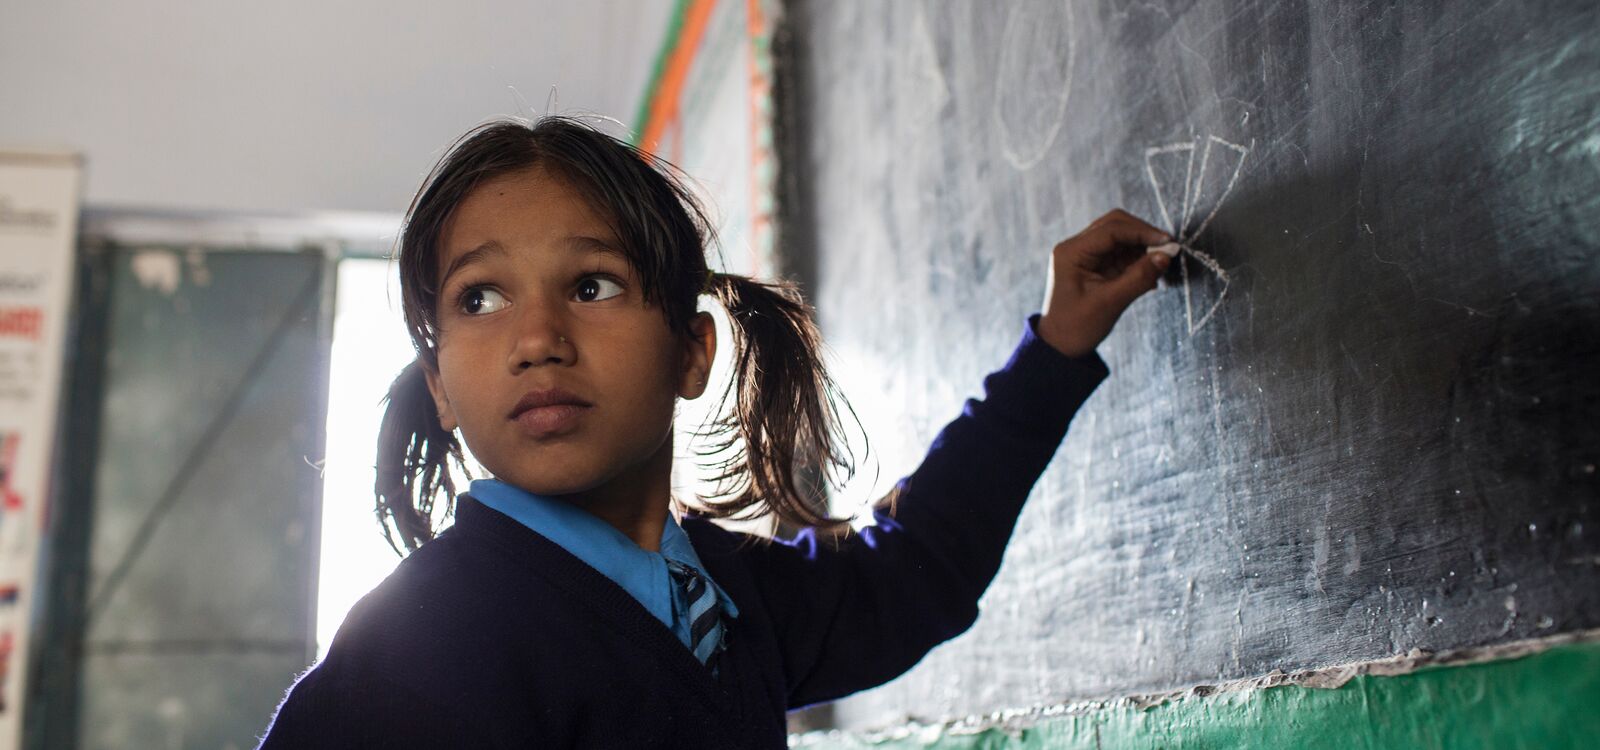 Indian girl writing on a chalkboard in a classroom